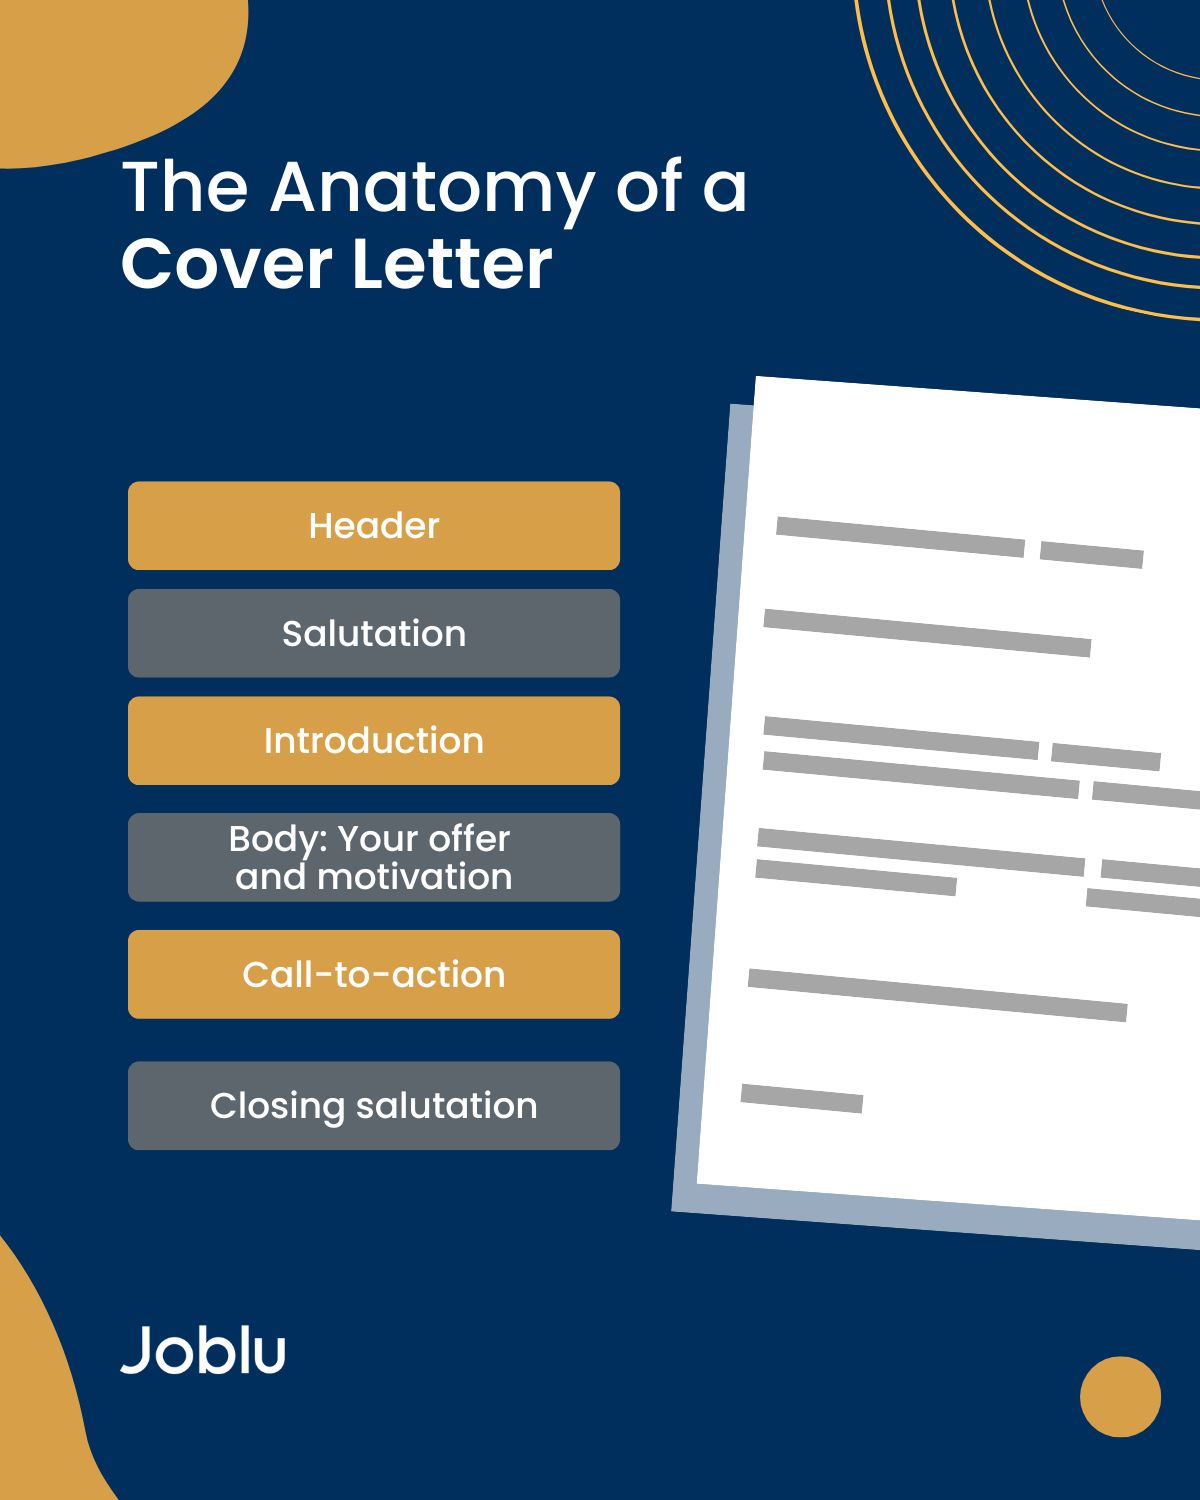 Anatomy of a cover letter